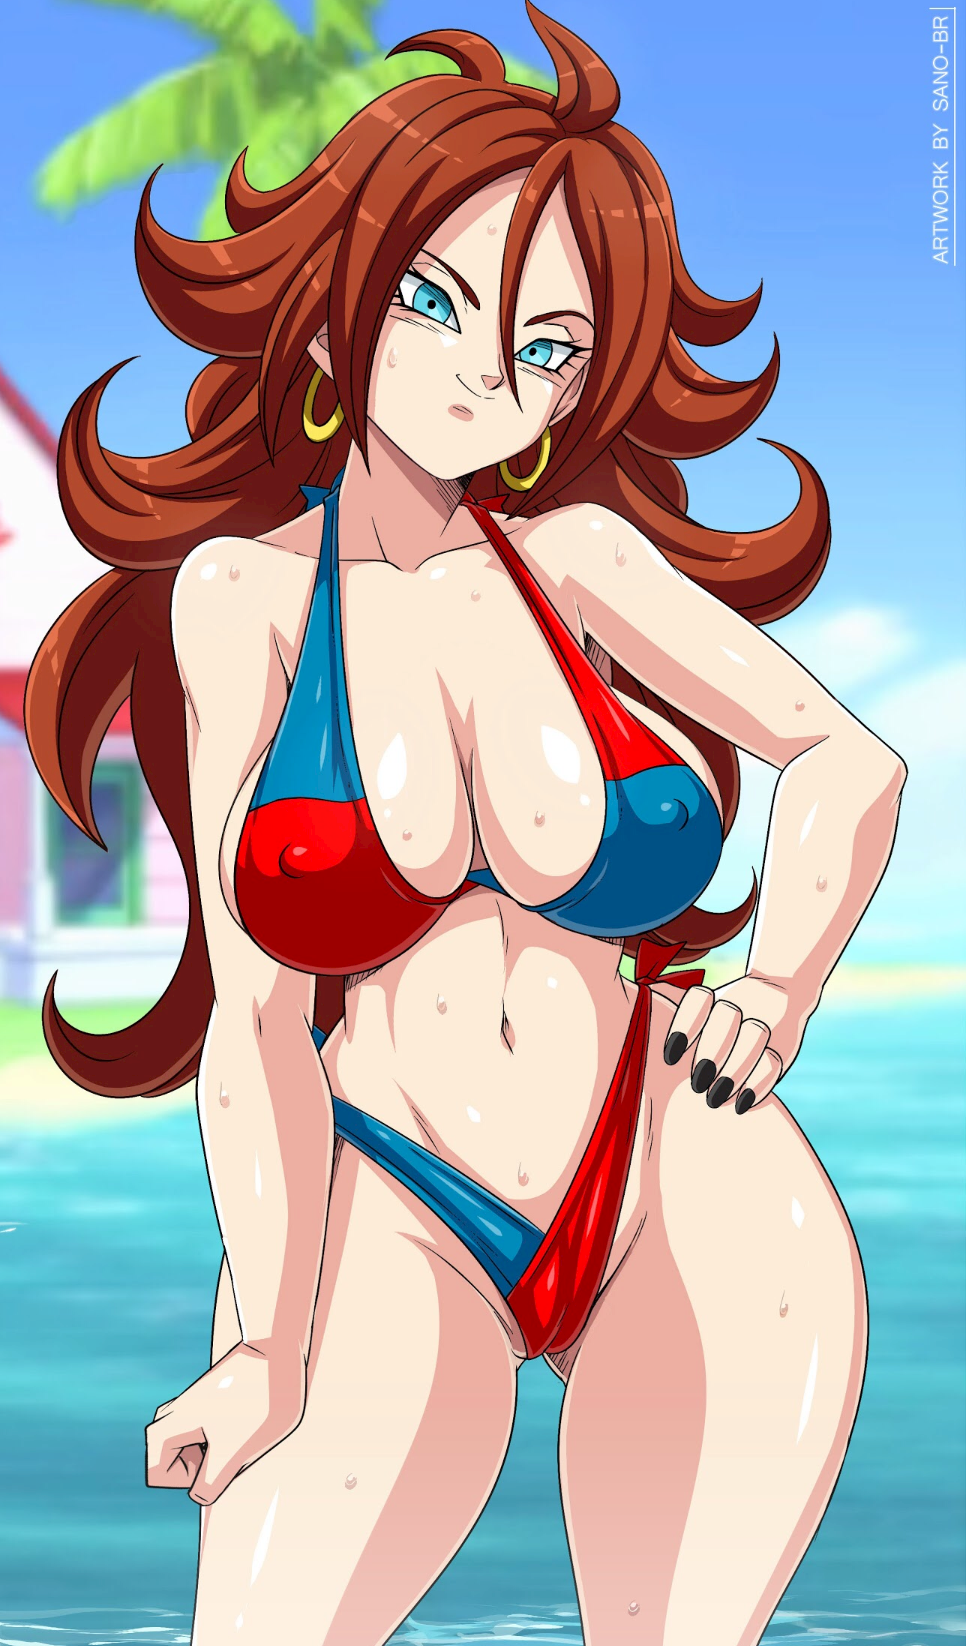 Nude android 21